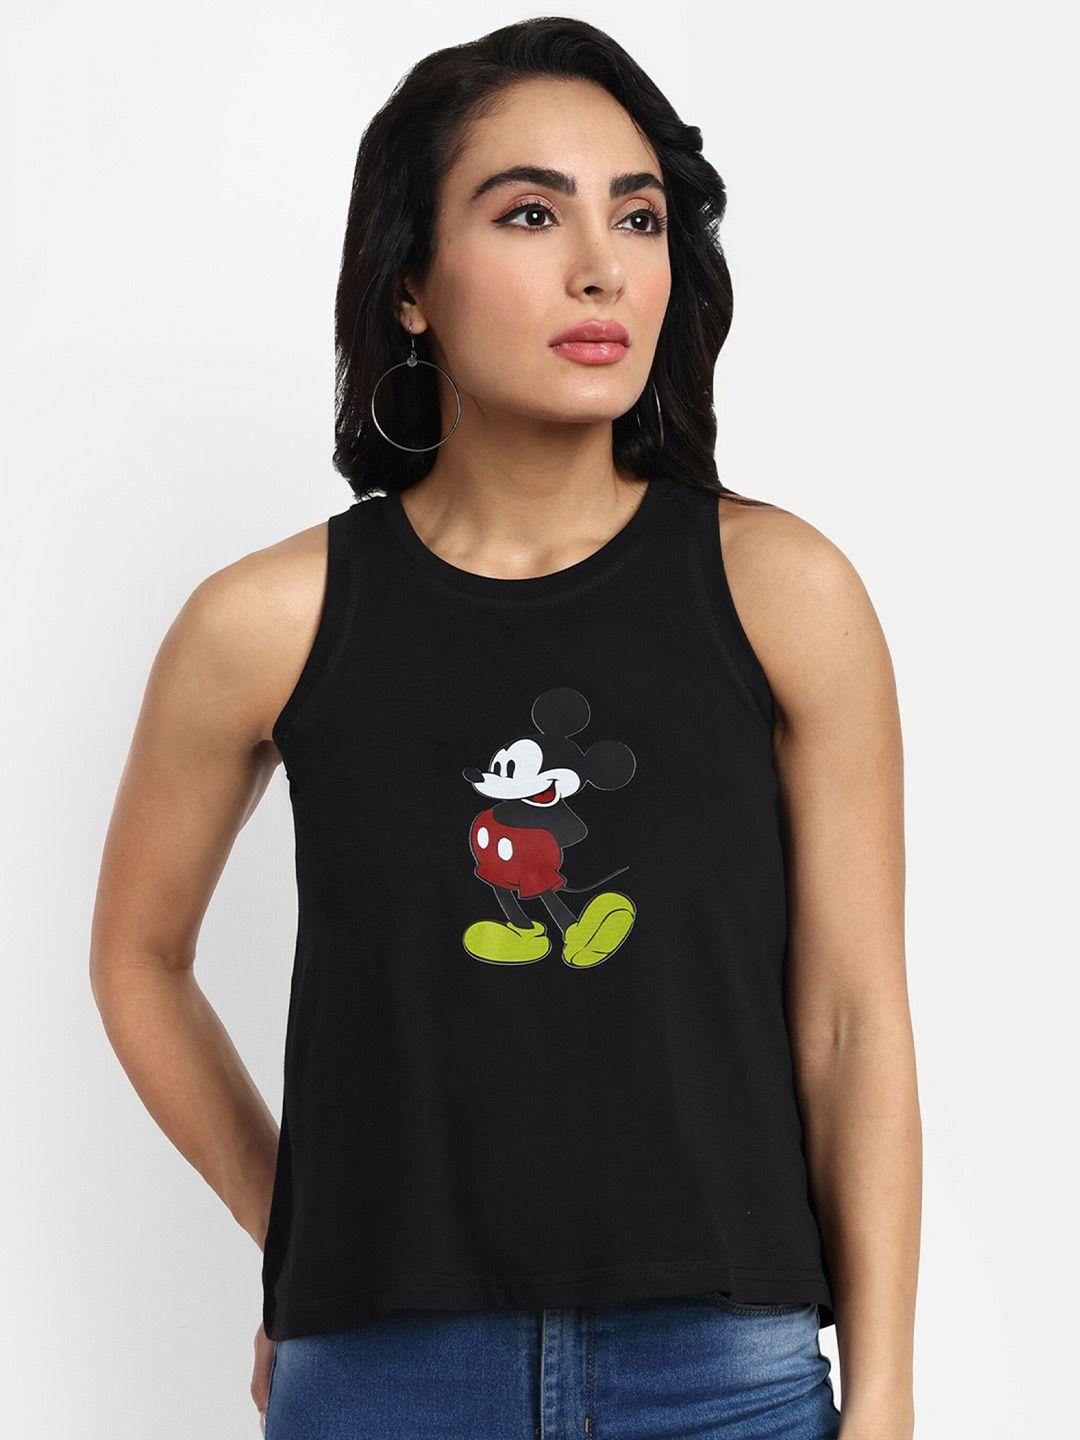 viso mickey mouse printed cotton tank top